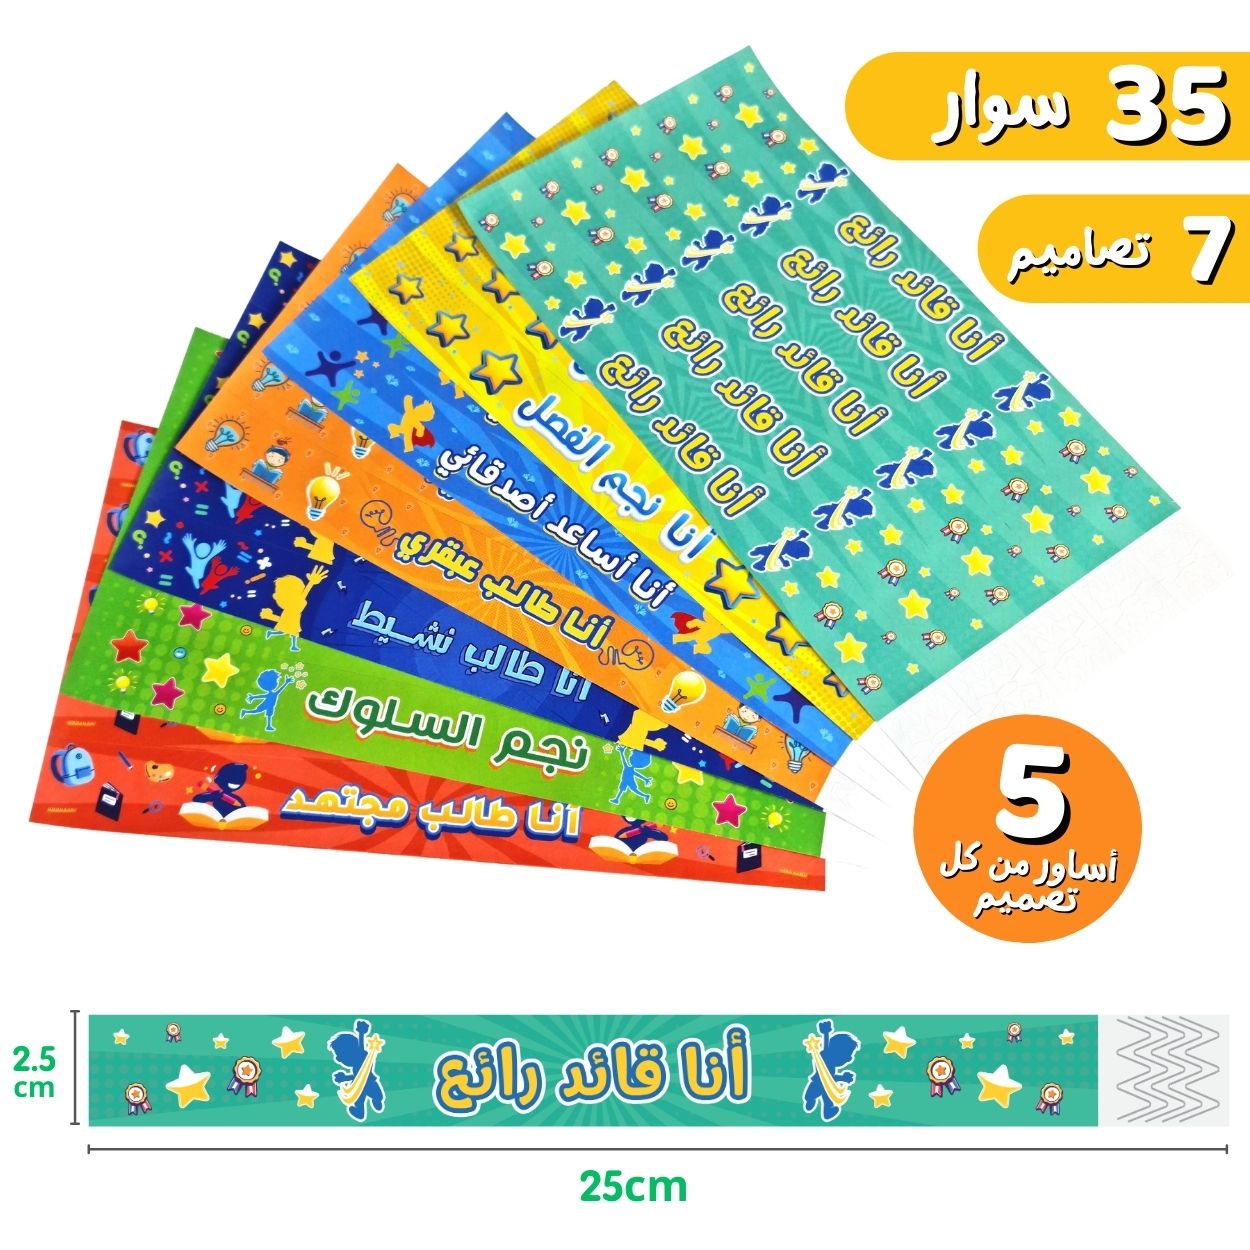 Teachers Arabic Rewards Bracelets for Boys: Motivational and Gifts Supplies for Students and Kids - Set of 35 Pcs in 7 Designs